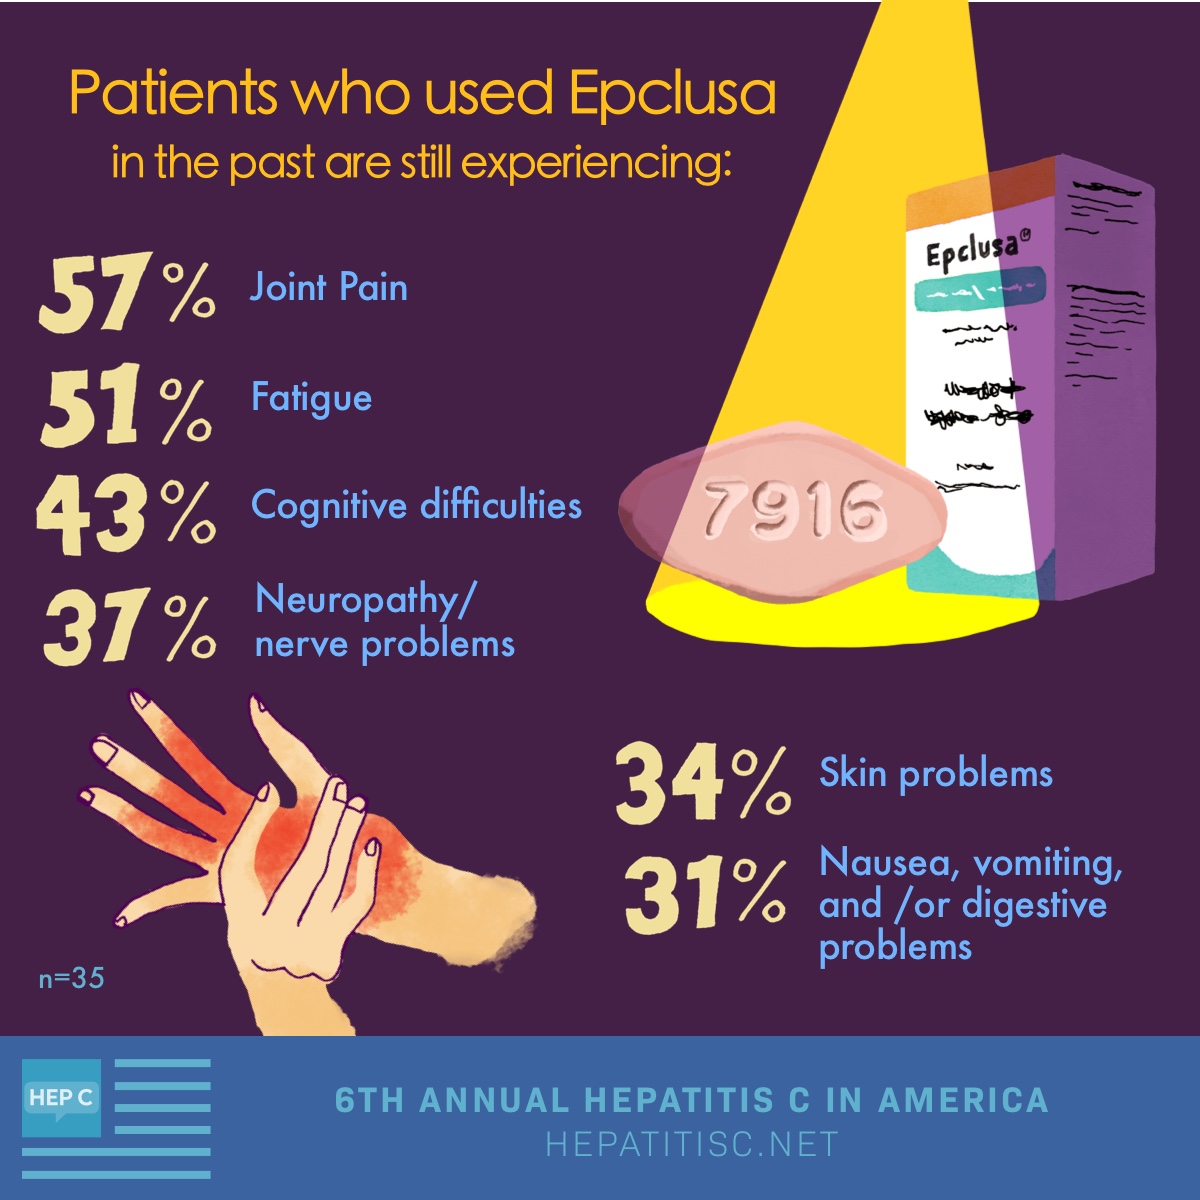 Patients who used Epclusa in the past are still experiencing: 57% joint pain, 51% fatigue, 43% cognitive difficulties